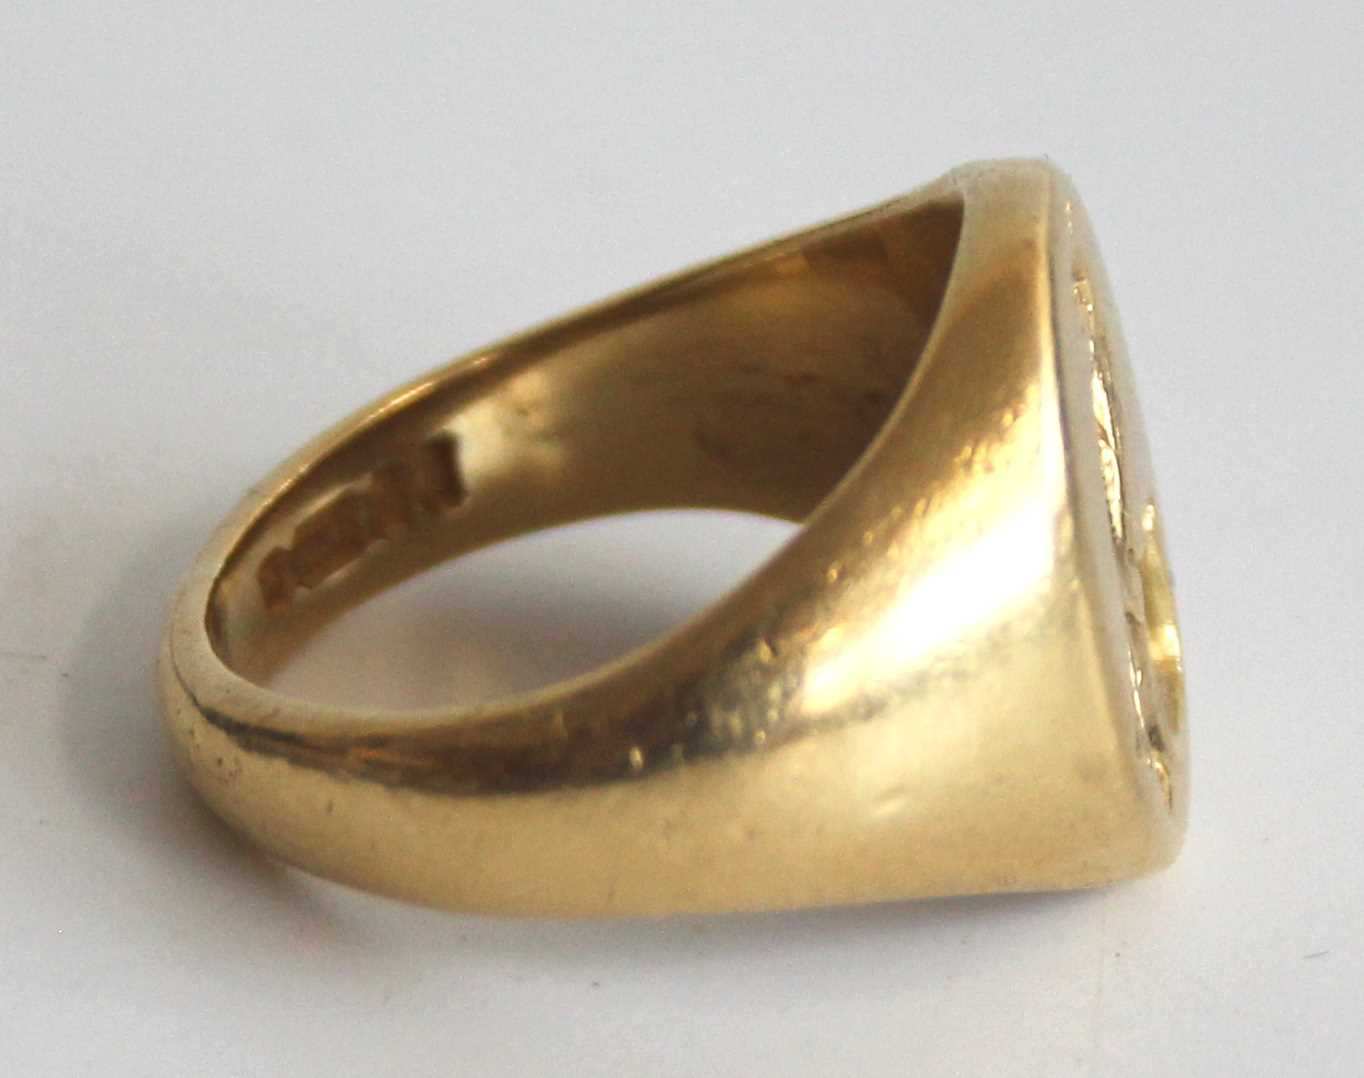 A gent's 18ct gold signet ring, the head carved in relief with a bird upon a branch, 13.3g, London - Image 2 of 6